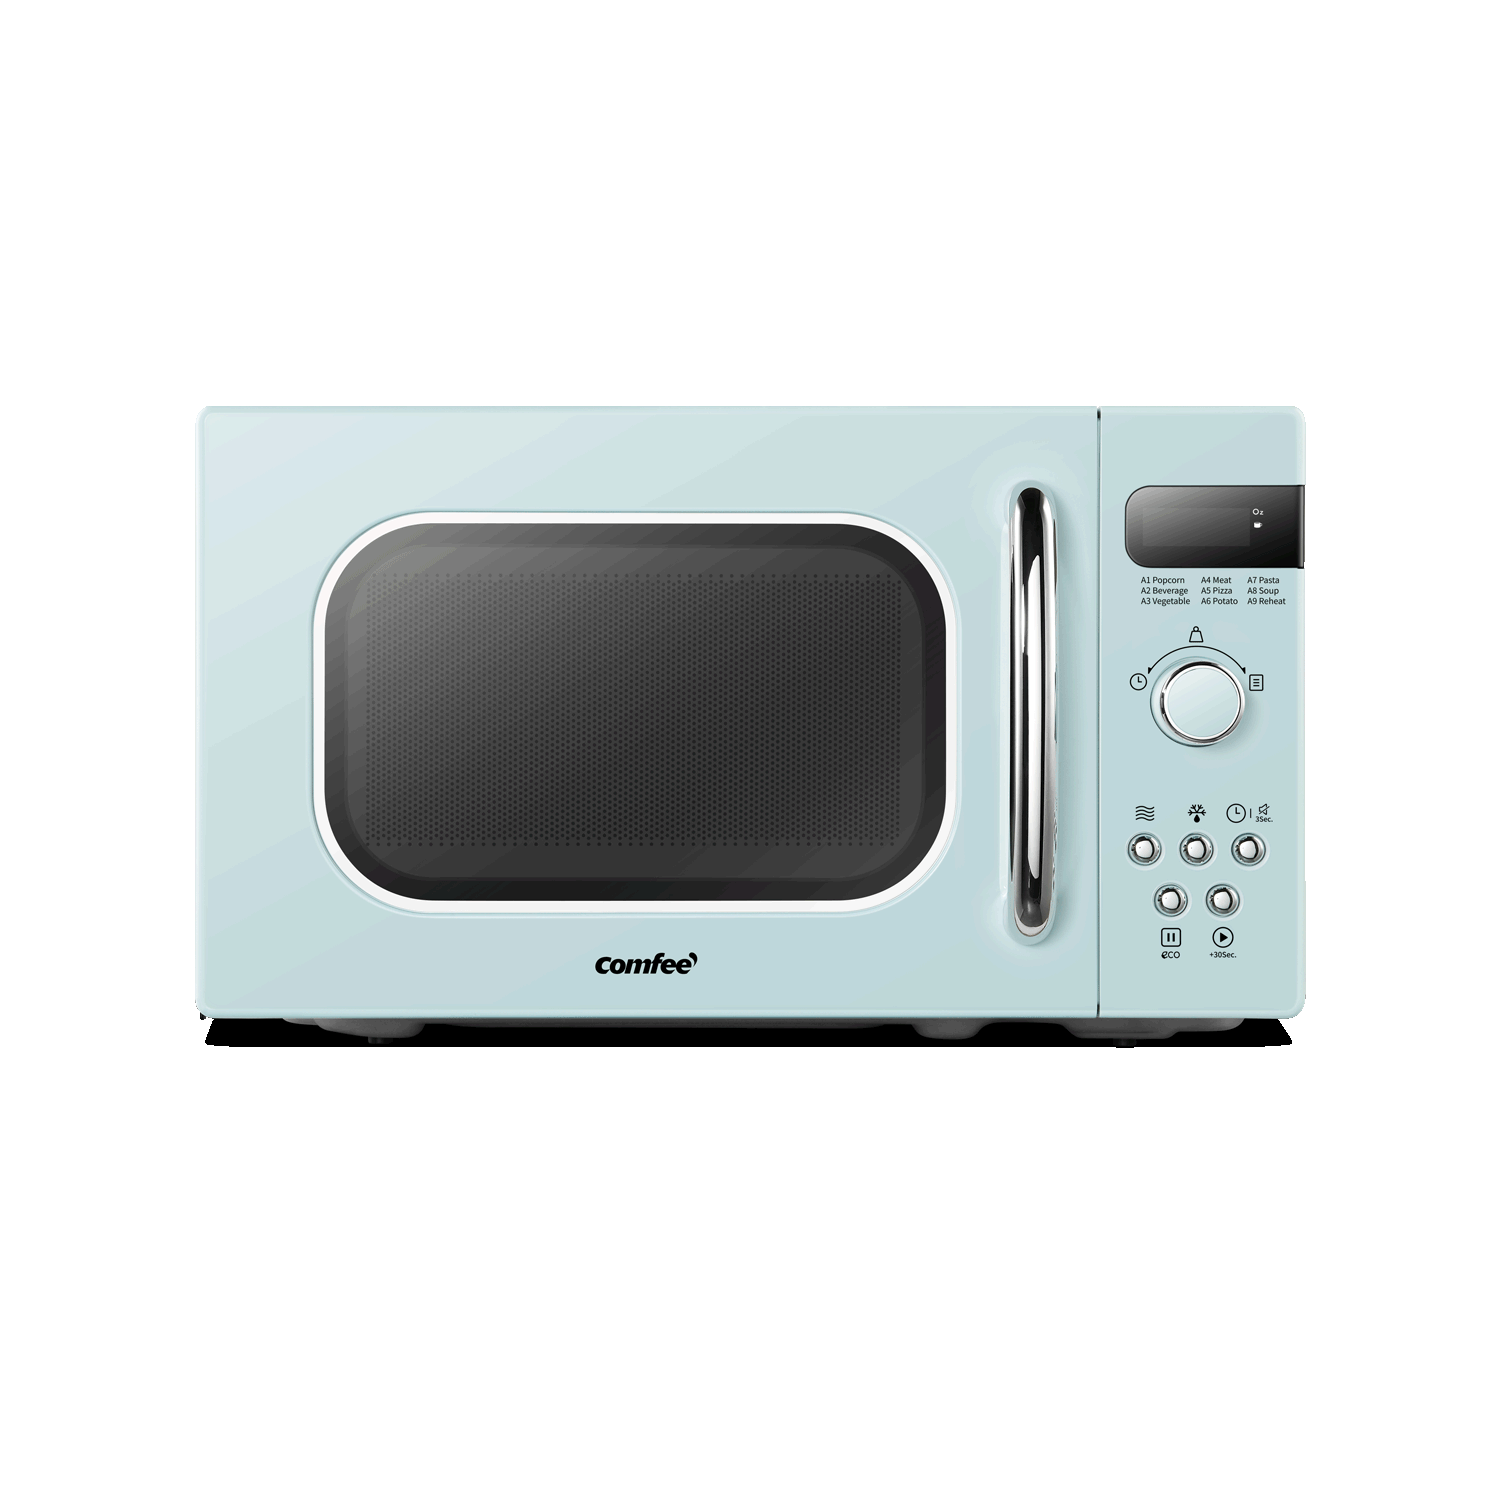 COMFEE' Retro Microwave with Multi-stage Cooking, Pastel Green